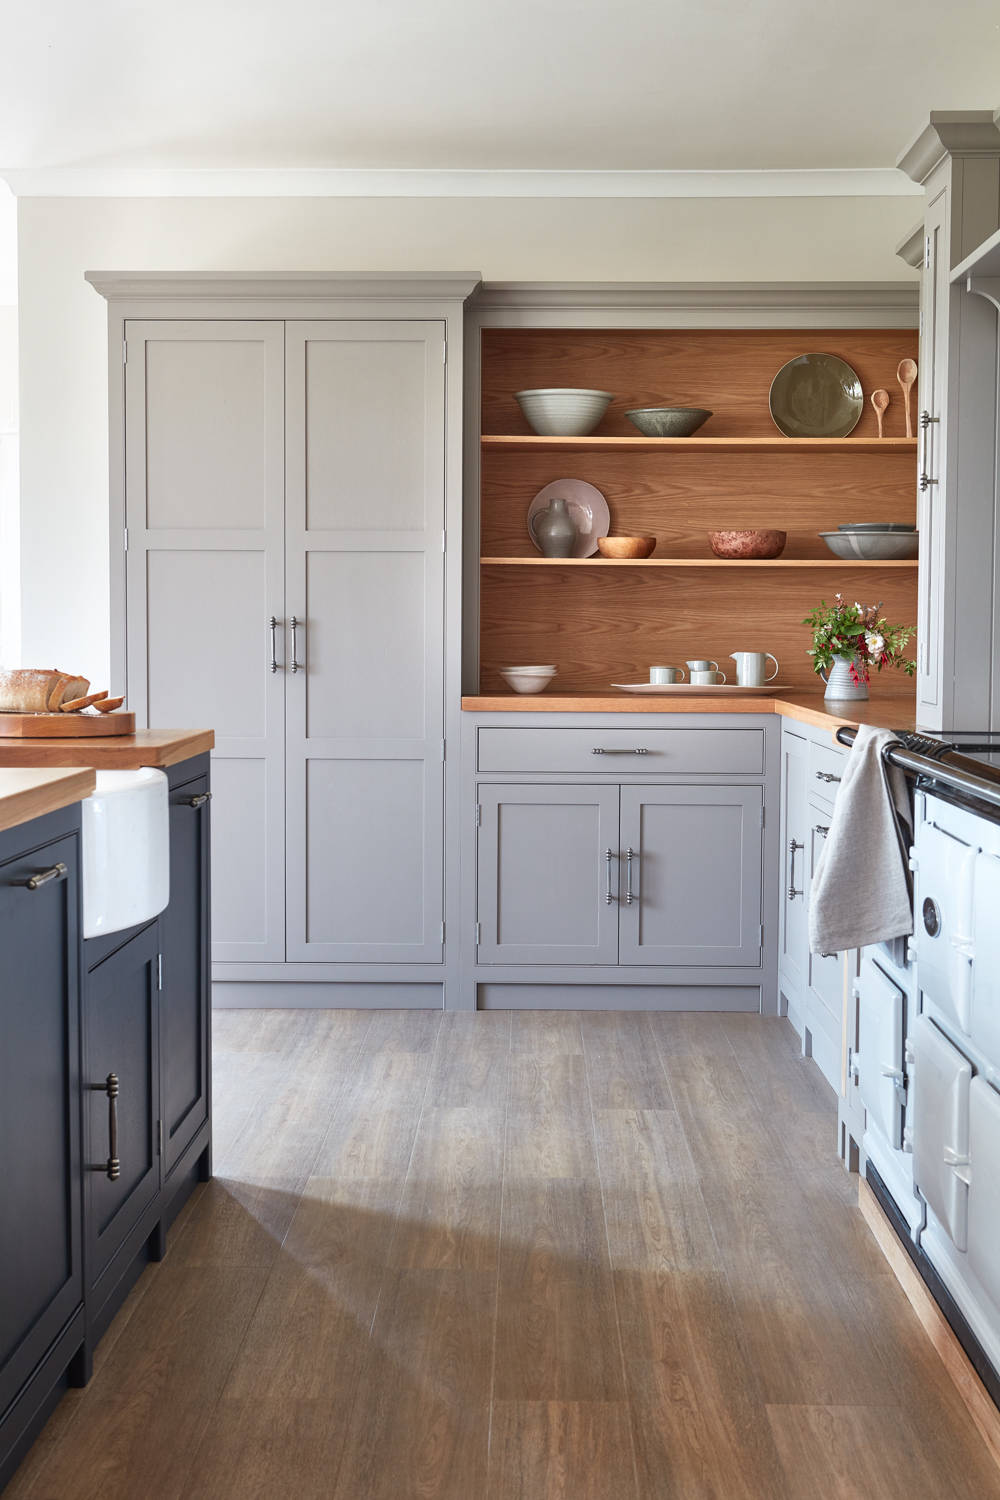 NAKED Kitchens 의 The Anmer Hall Kitchen | homify